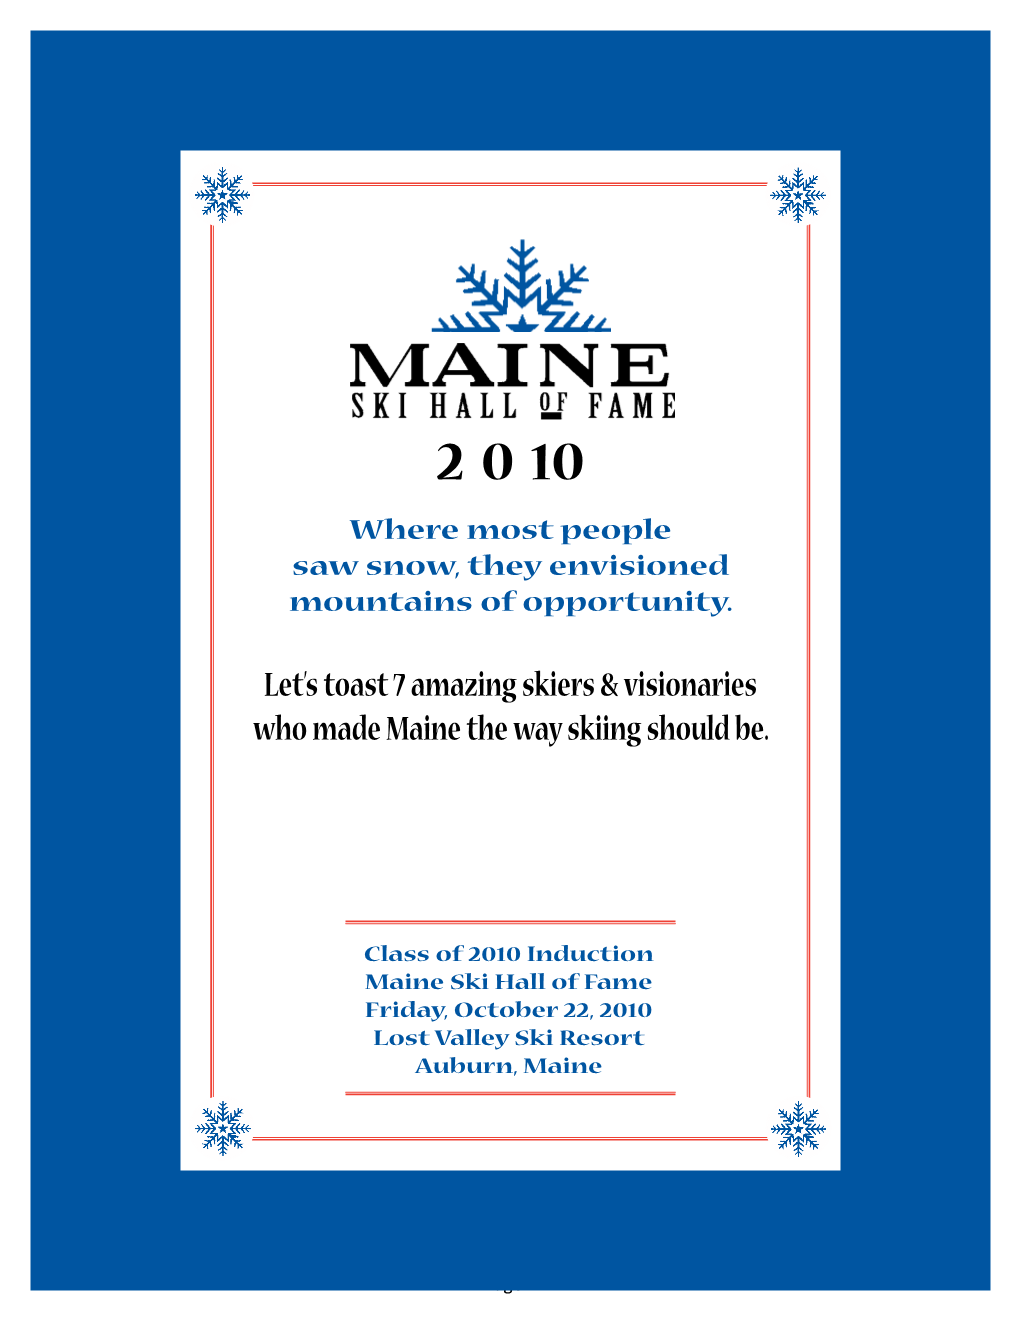 Let's Toast 7 Amazing Skiers & Visionaries Who Made Maine The